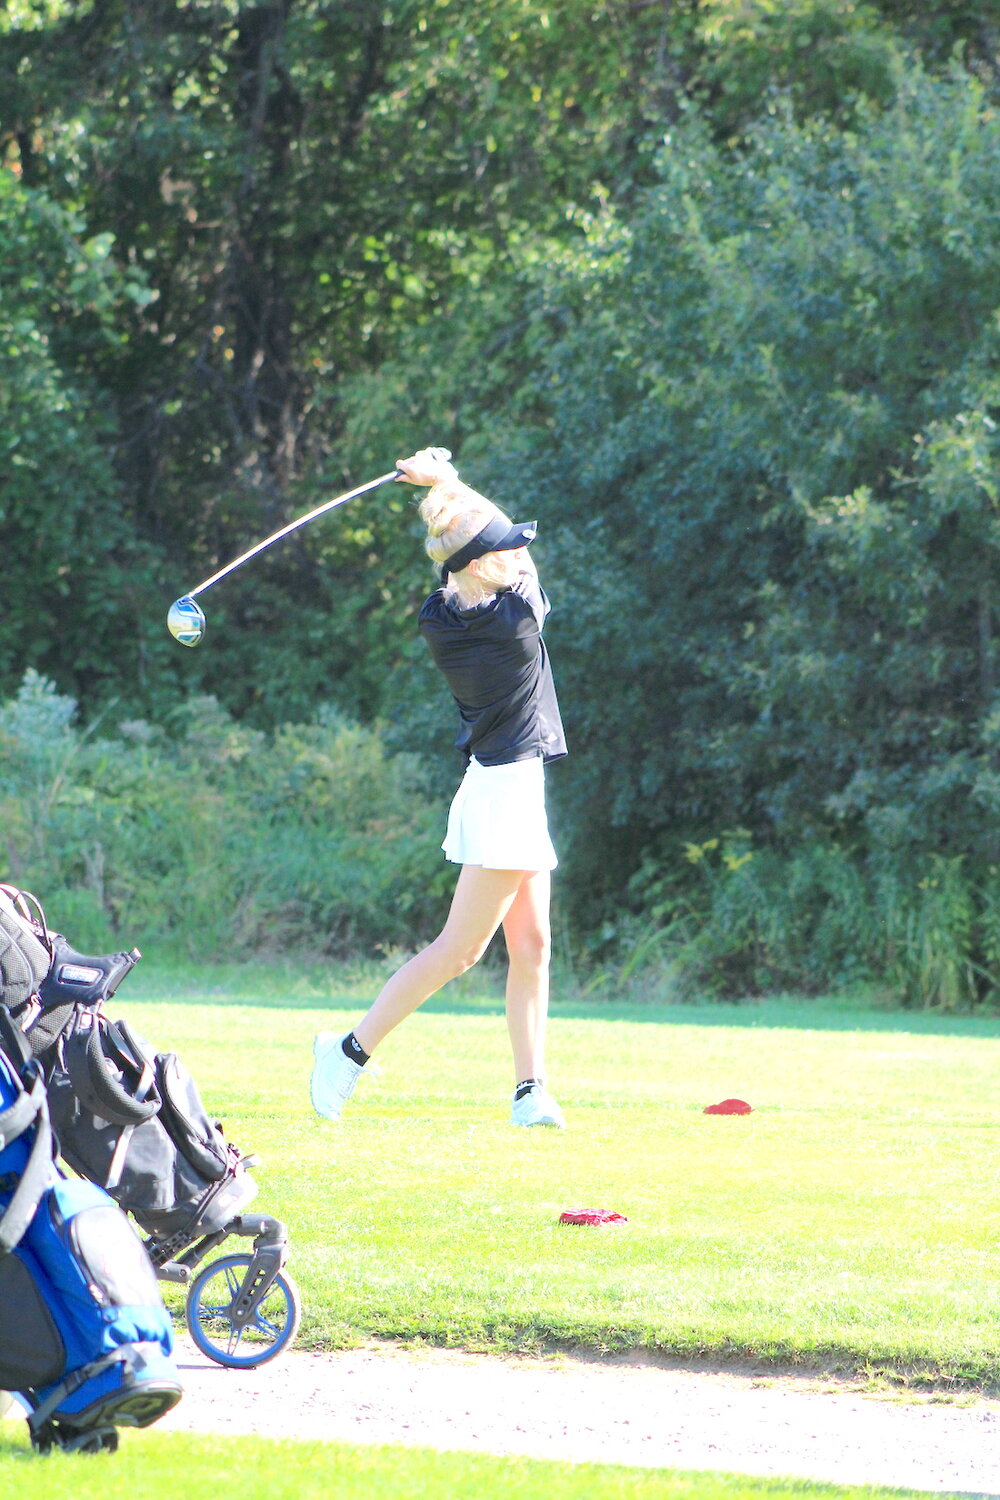 Allie Goodman tees off on hole 10 at Whispering Pines Thursday.